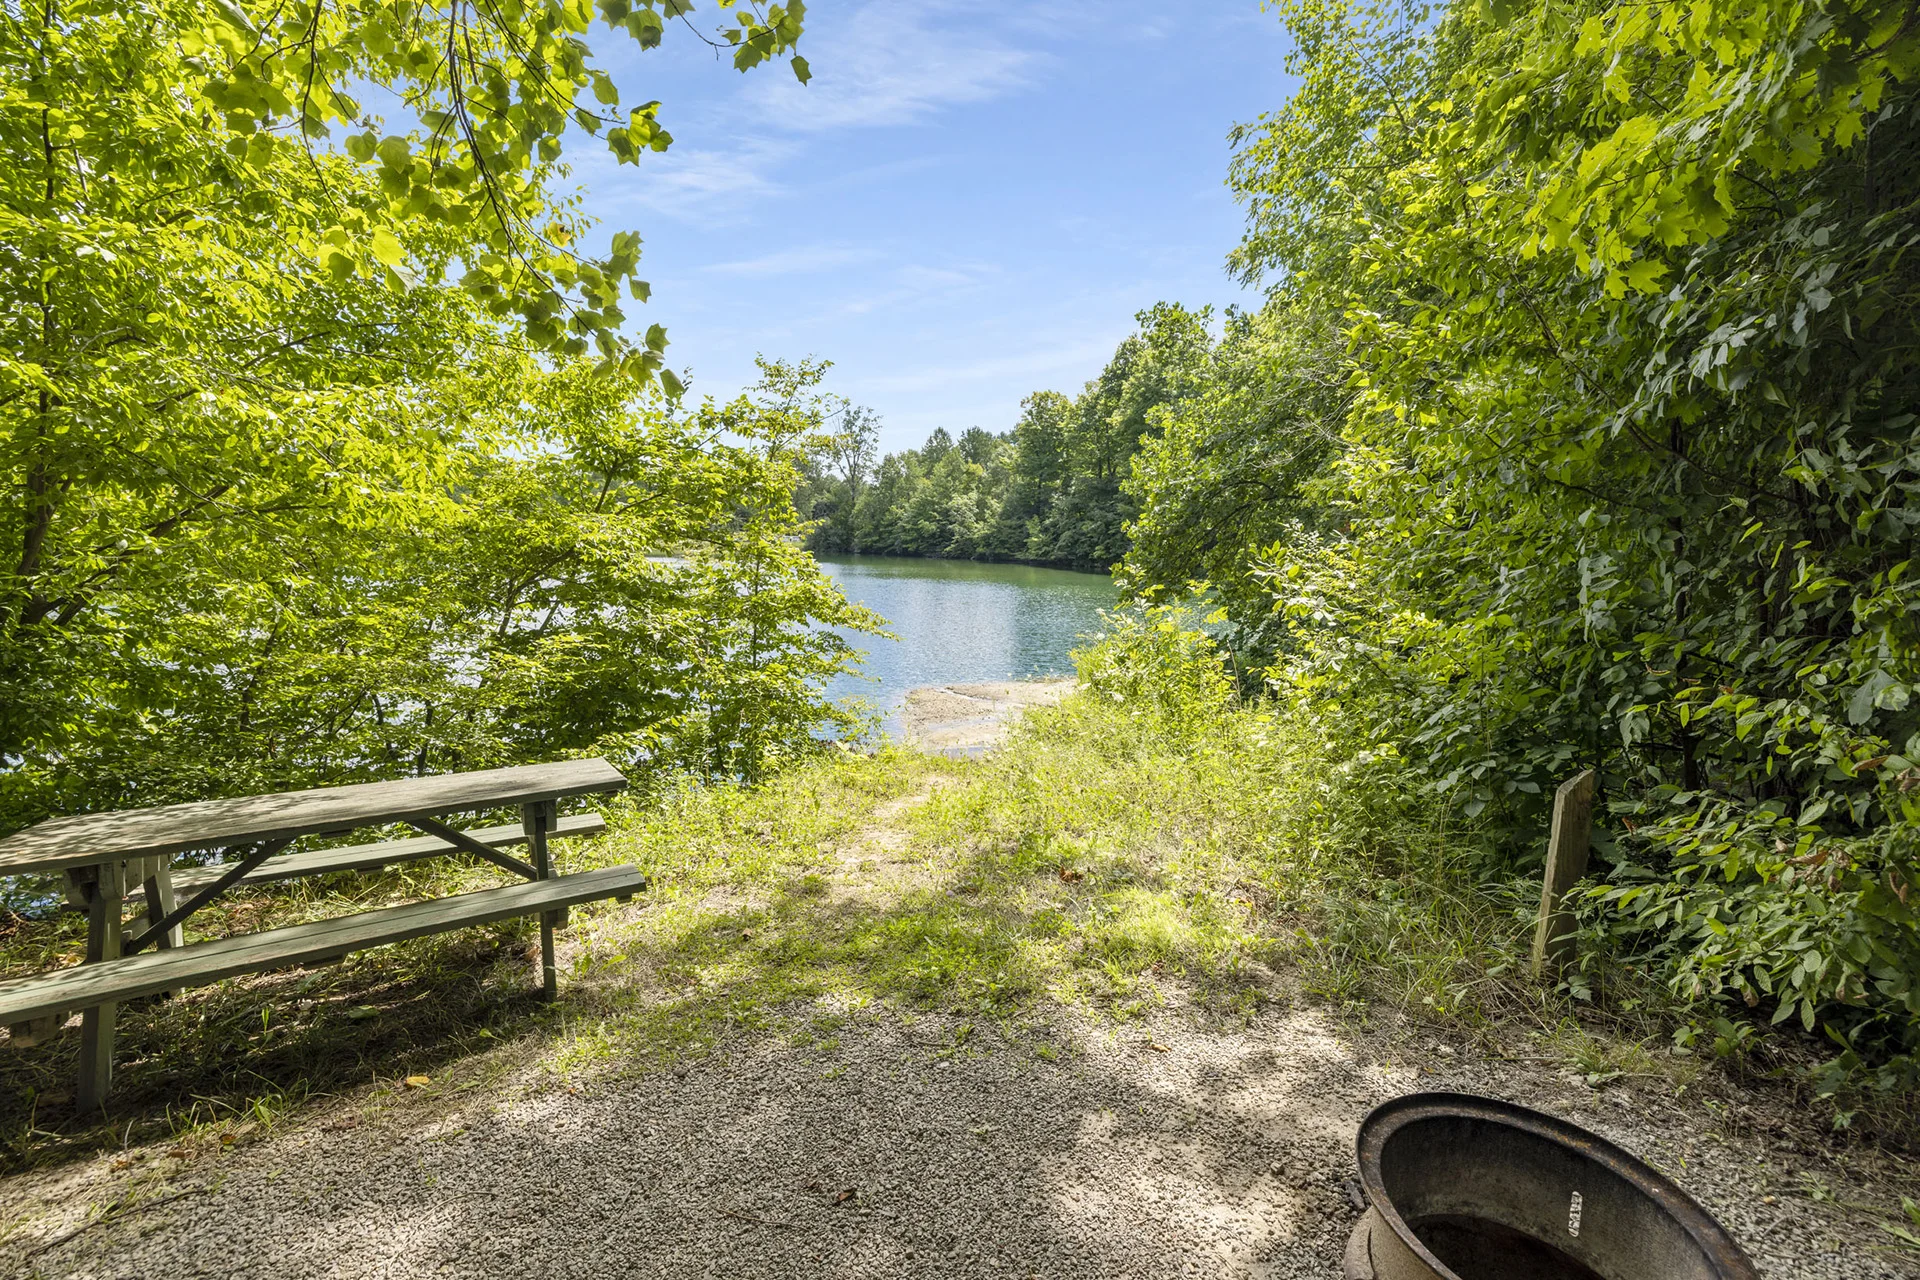 picnic bench with view of pond